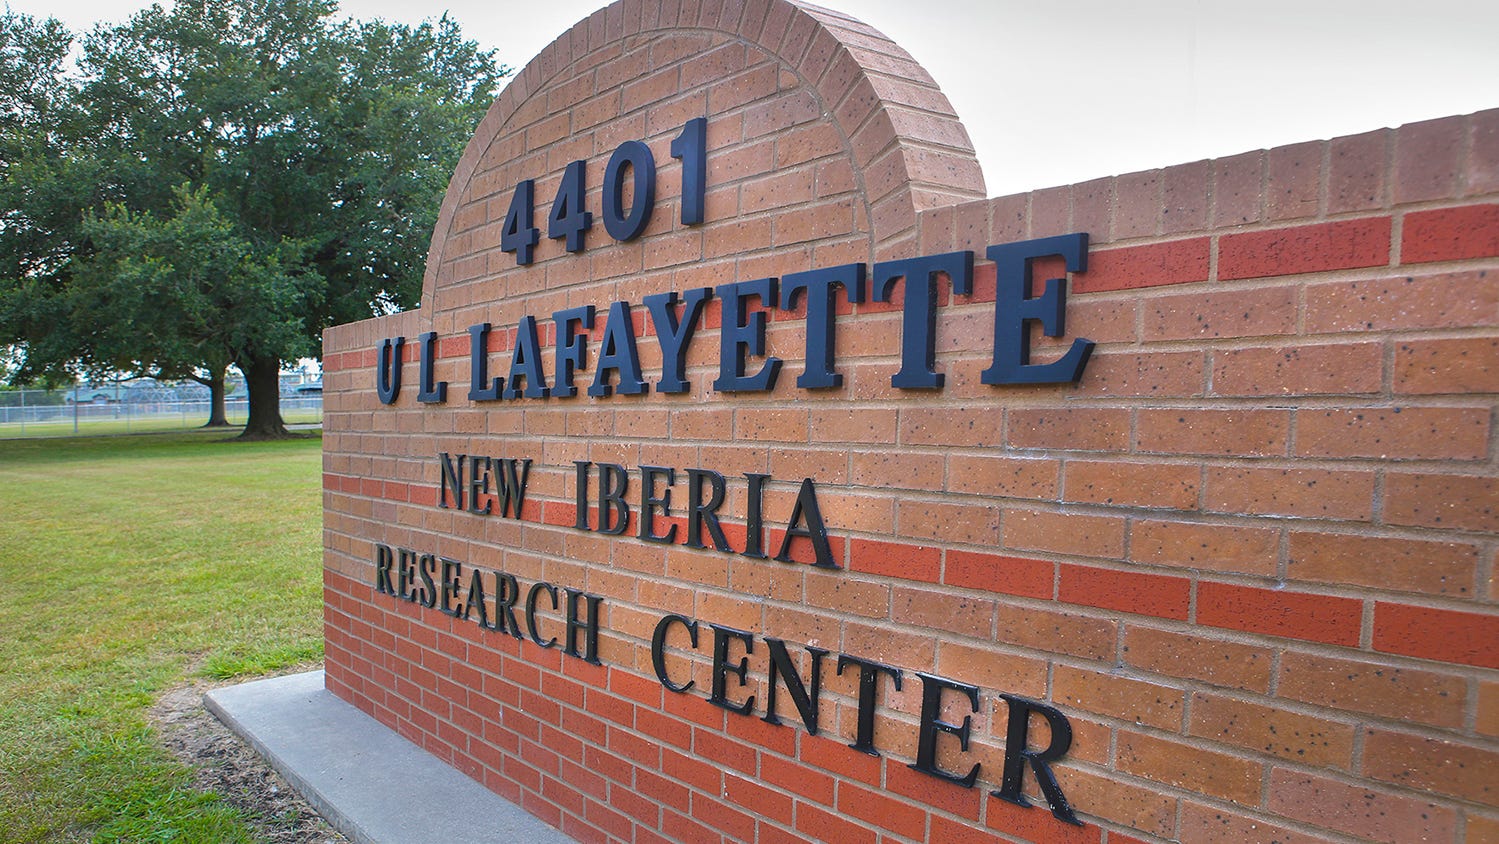 Groups make claims against UL Lafayette's New Iberia Research Center after primate deaths - Daily Advertiser